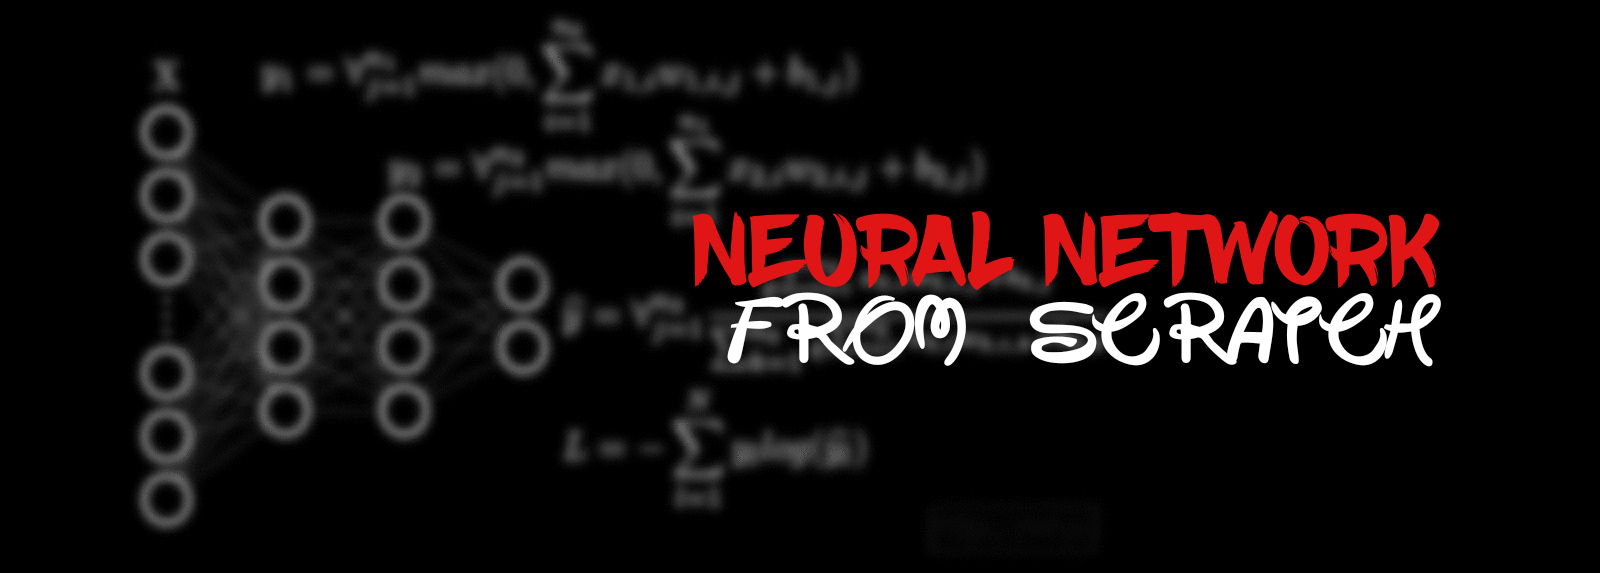 Neural Network from scratch - Part I